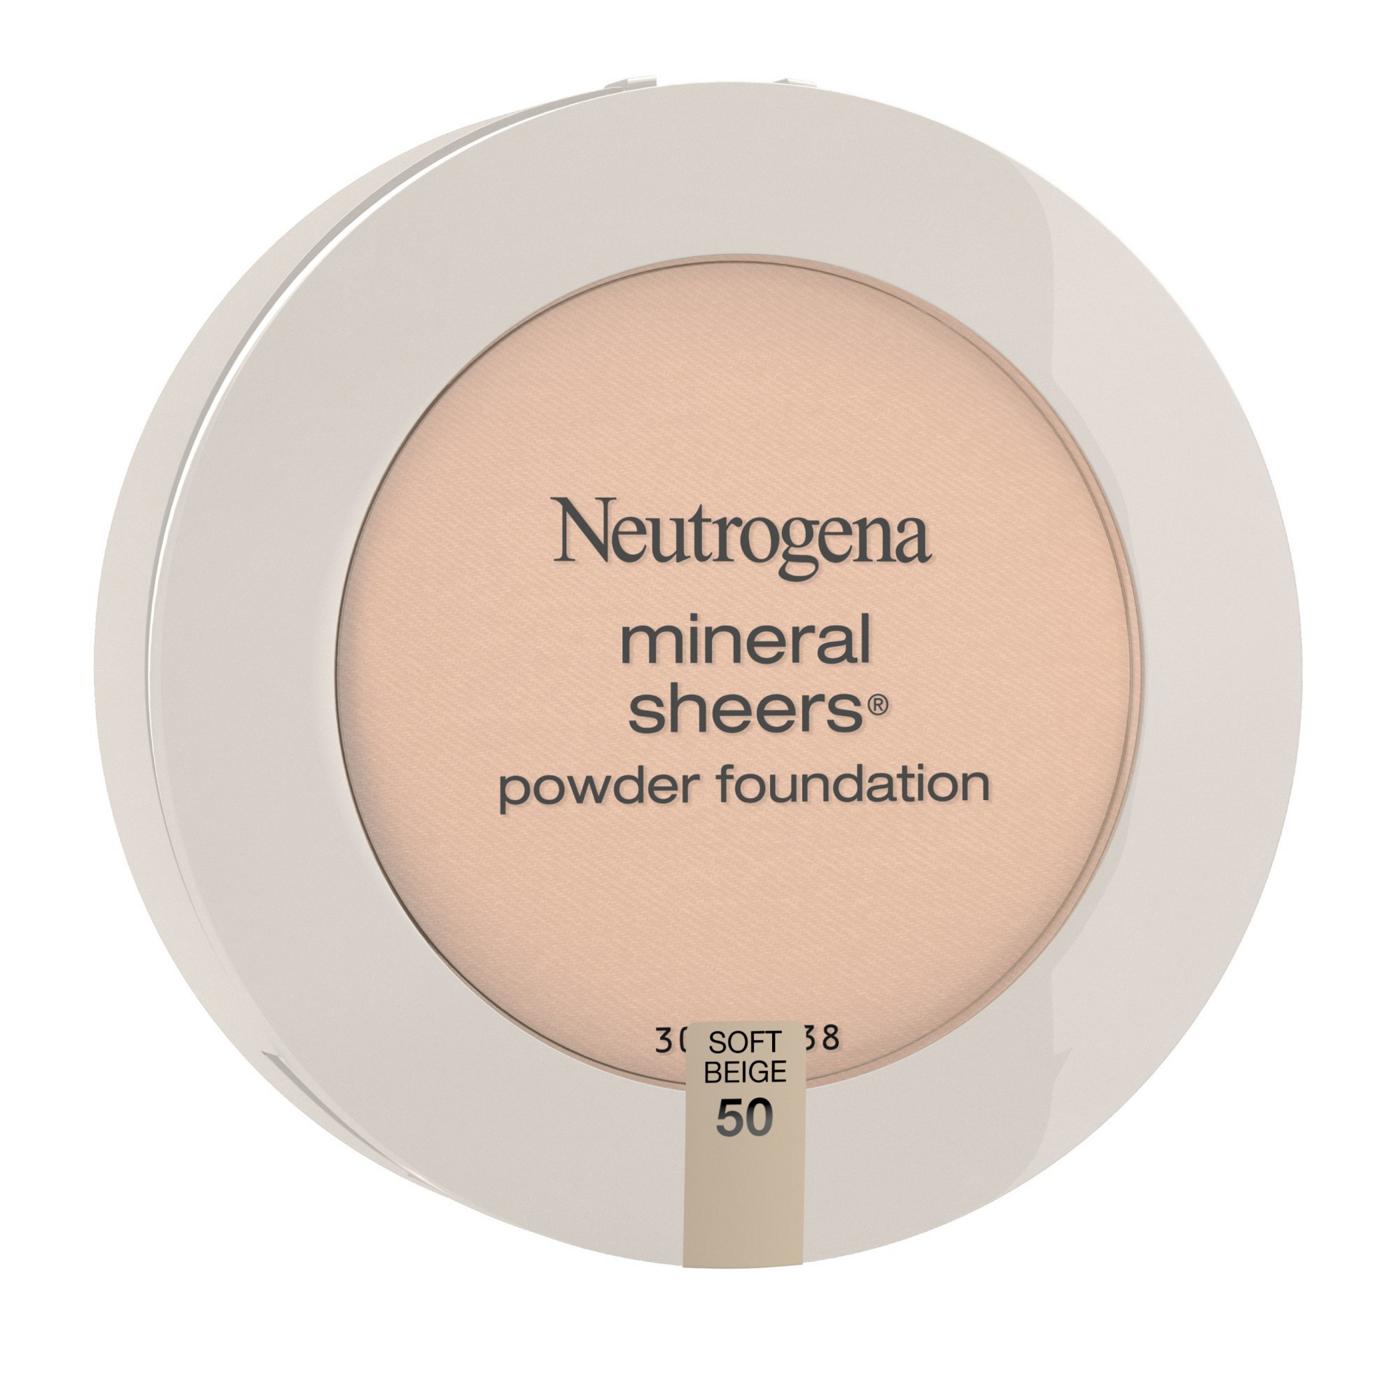 Neutrogena Mineral Sheers Compact Powder Foundation 50 Soft Beige; image 3 of 6